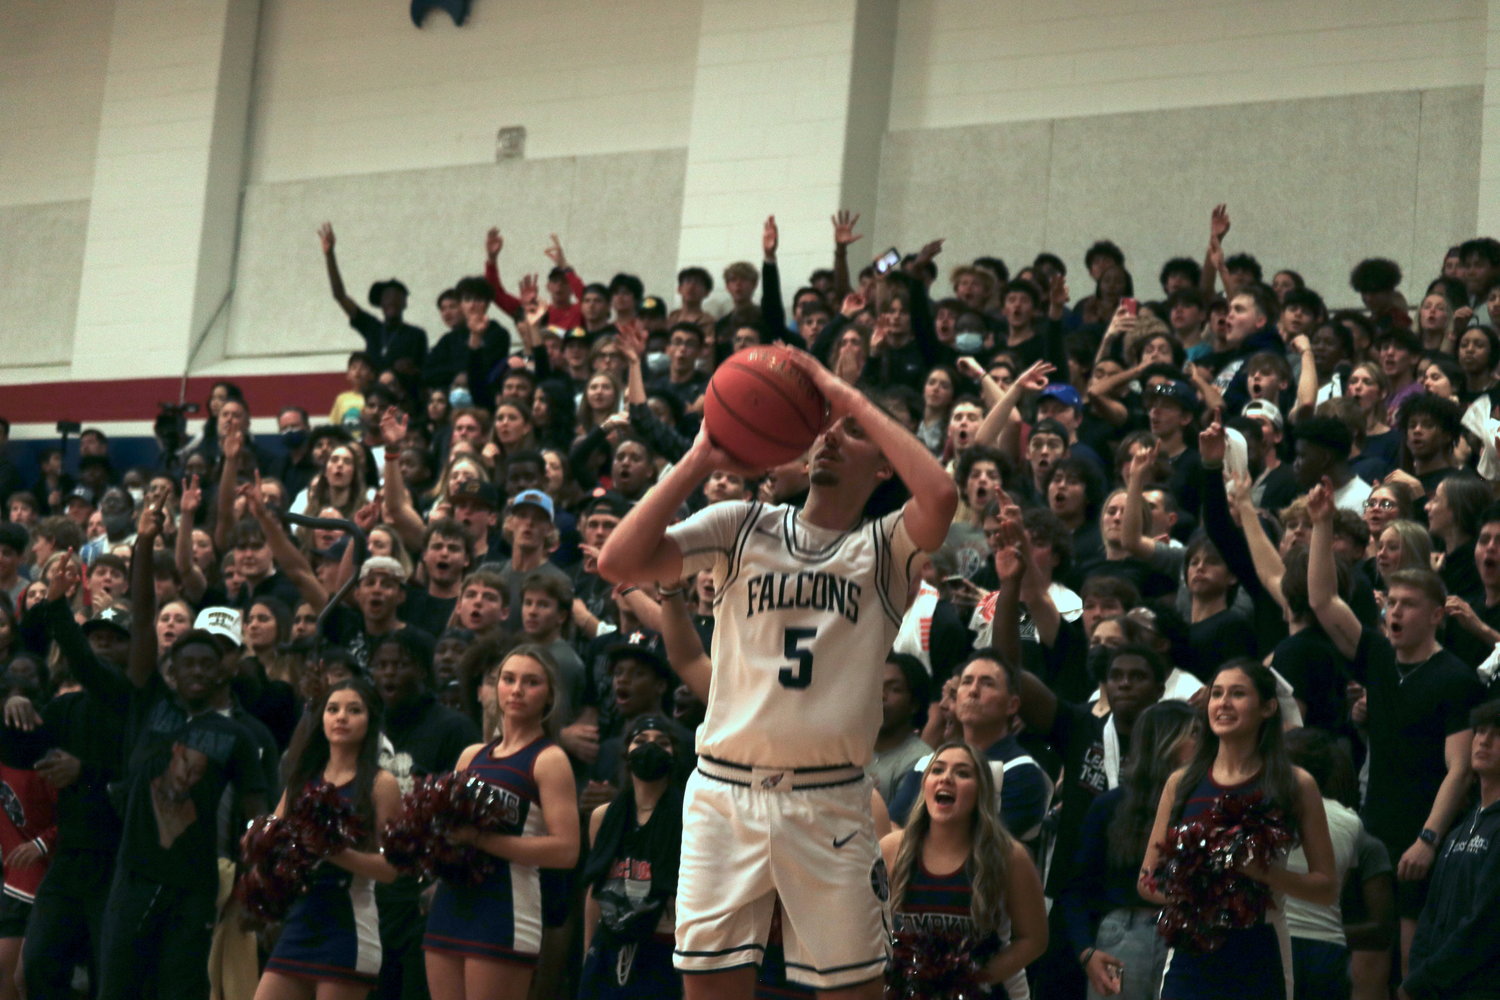 Tompkins’ Luke Coughran shoots a 3-pointer during Wednesday’s game against Seven Lakesat the Tompkins gym.